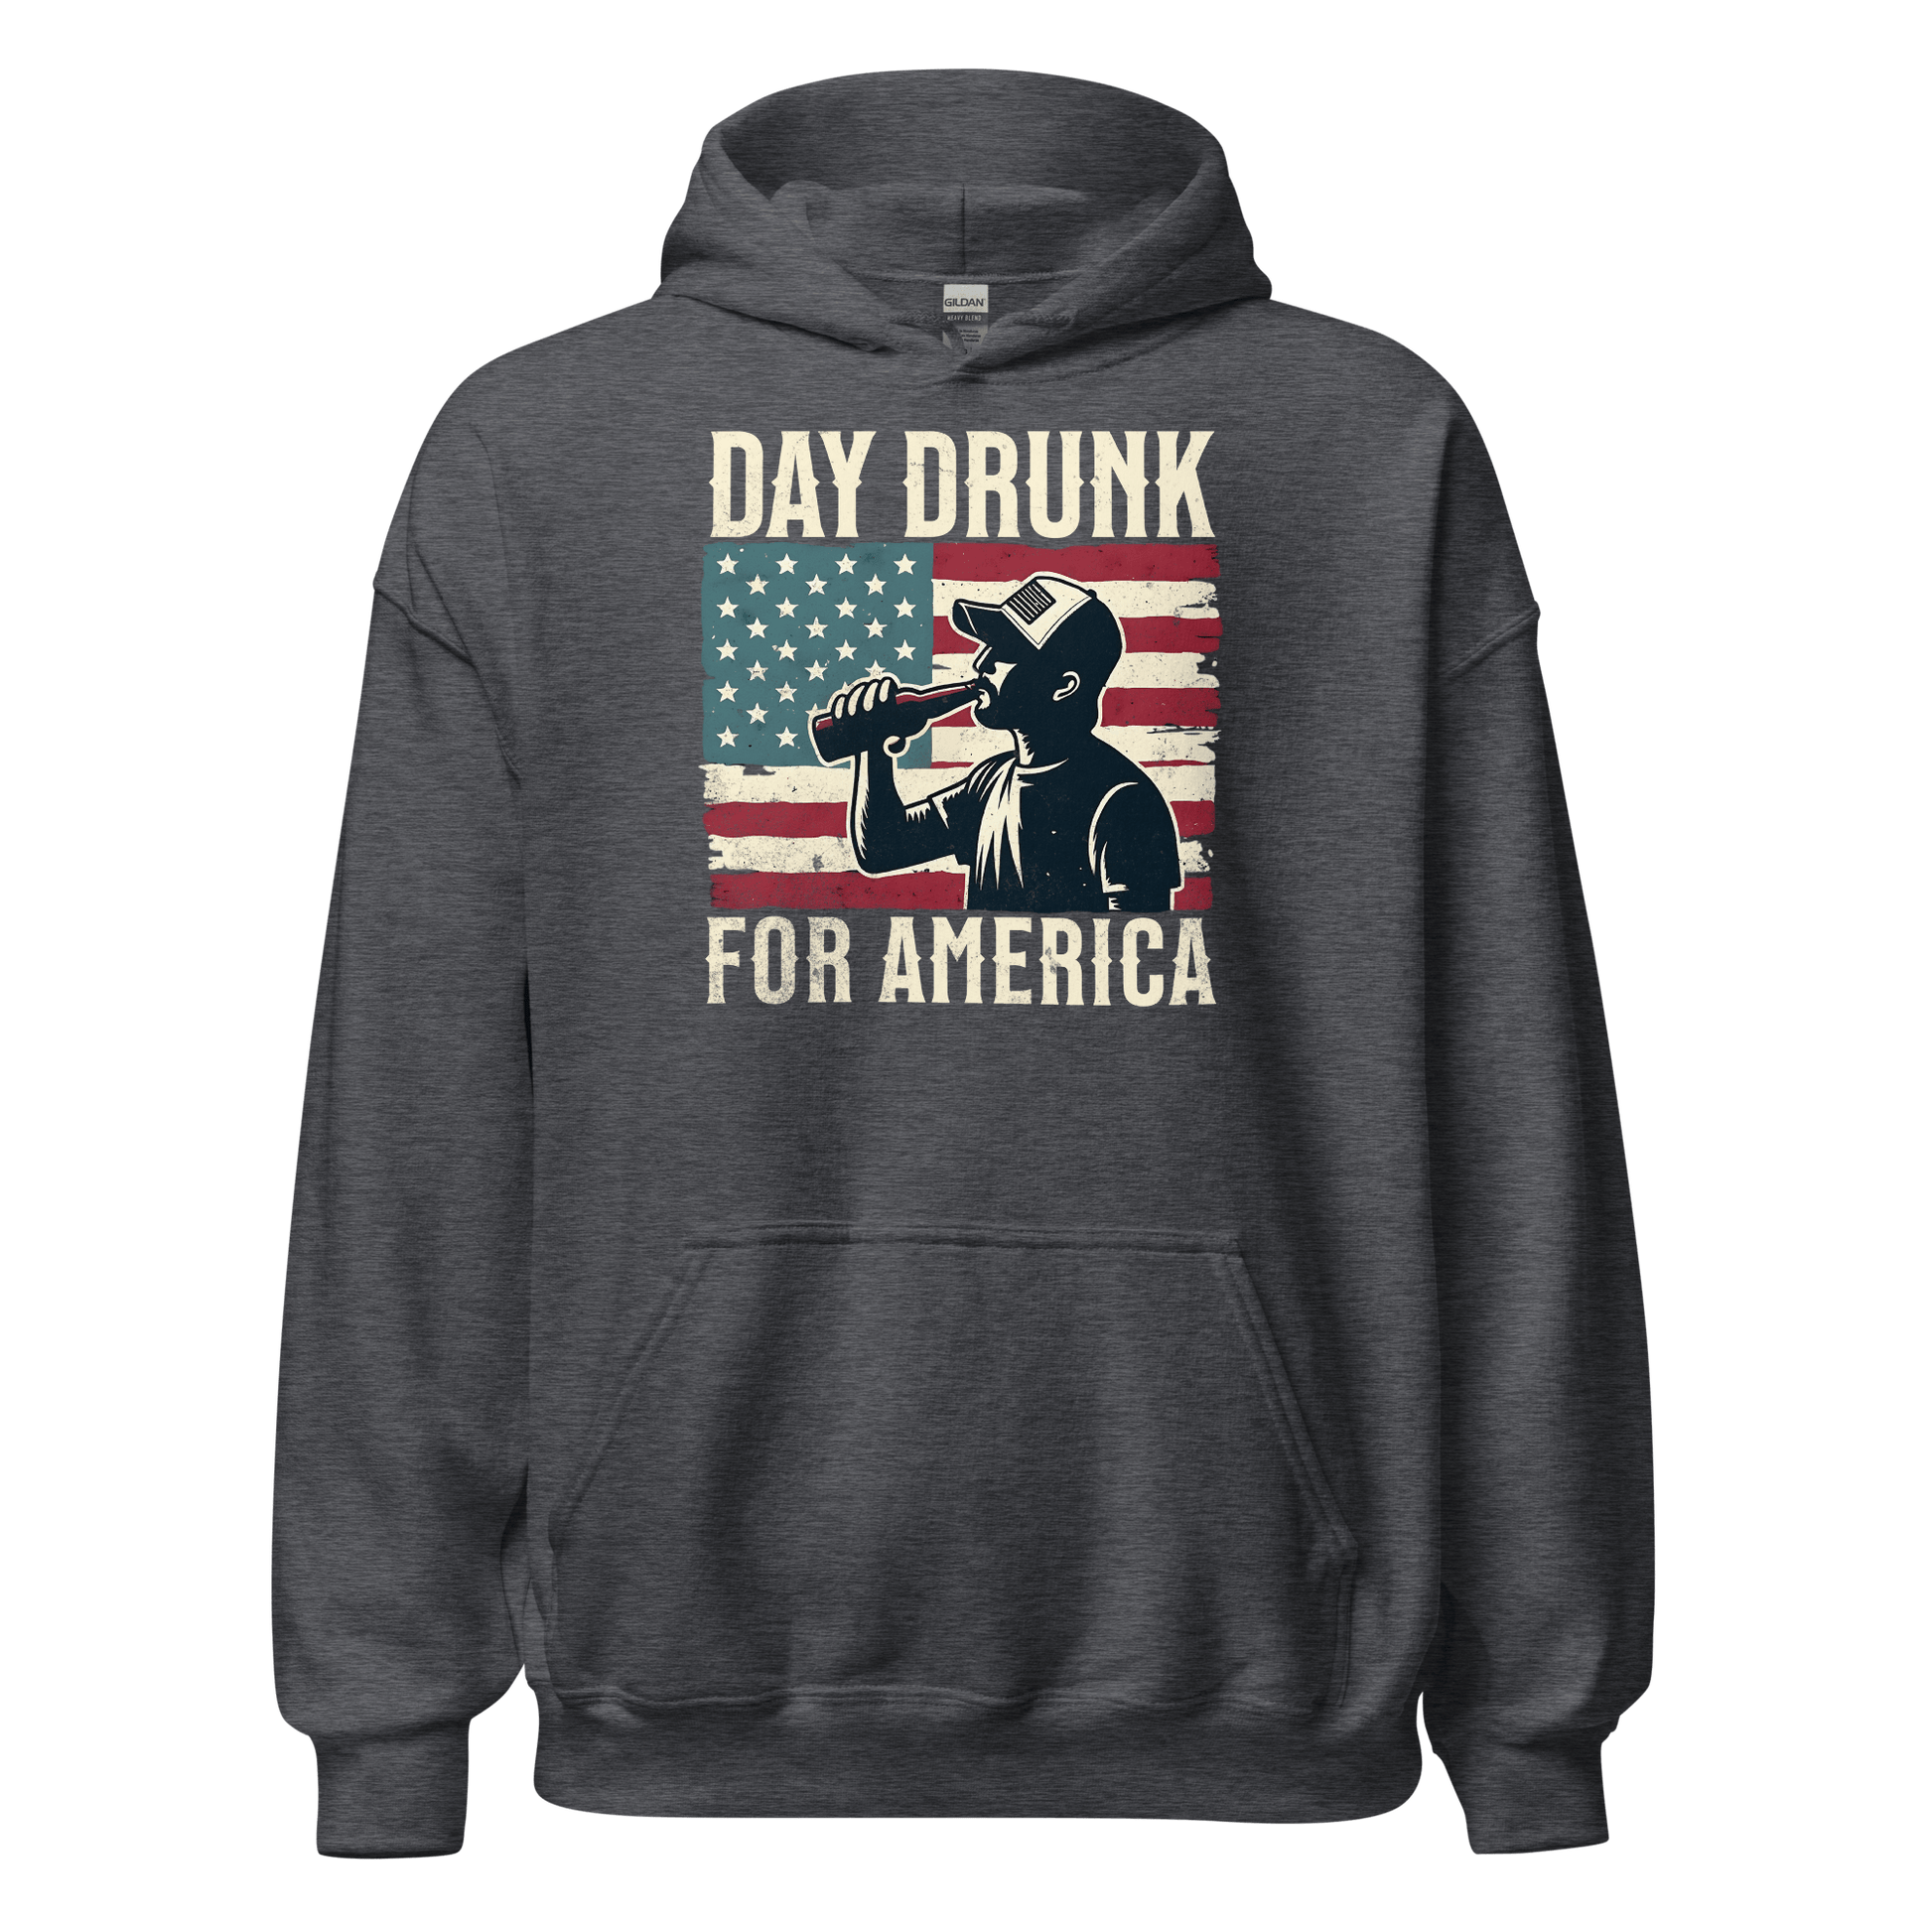 Hoodie with Day Drunk for America text, silhouette of a man drinking a bottle of beer, and distressed American flag background. Perfect for 4th of July.